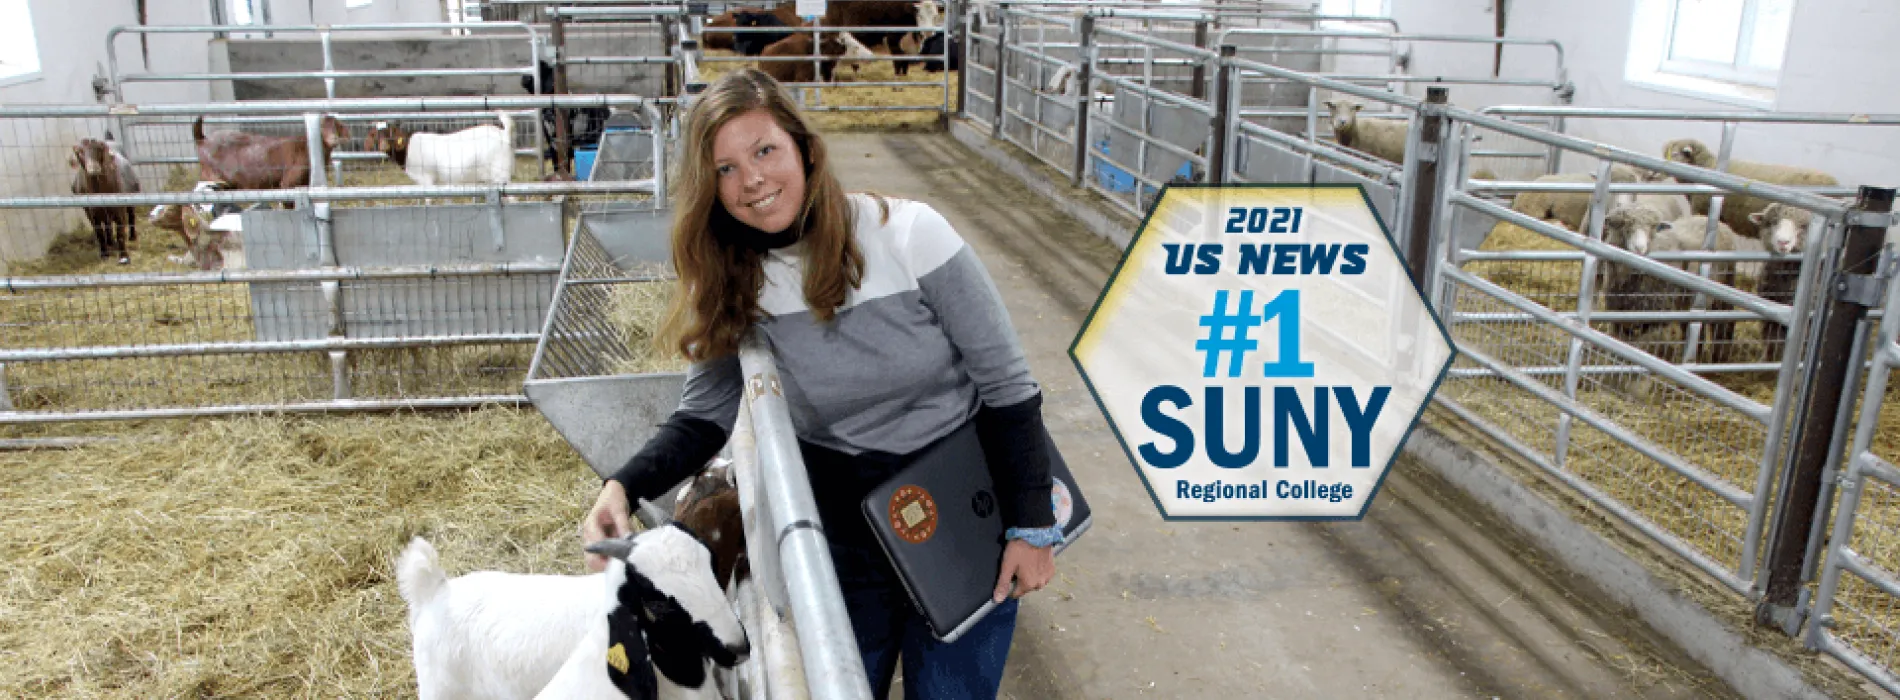 2021 US News #1 SUNY Regional College. Ag Entrepreneurship student with laptop in barn with goats, sheep, and cows.